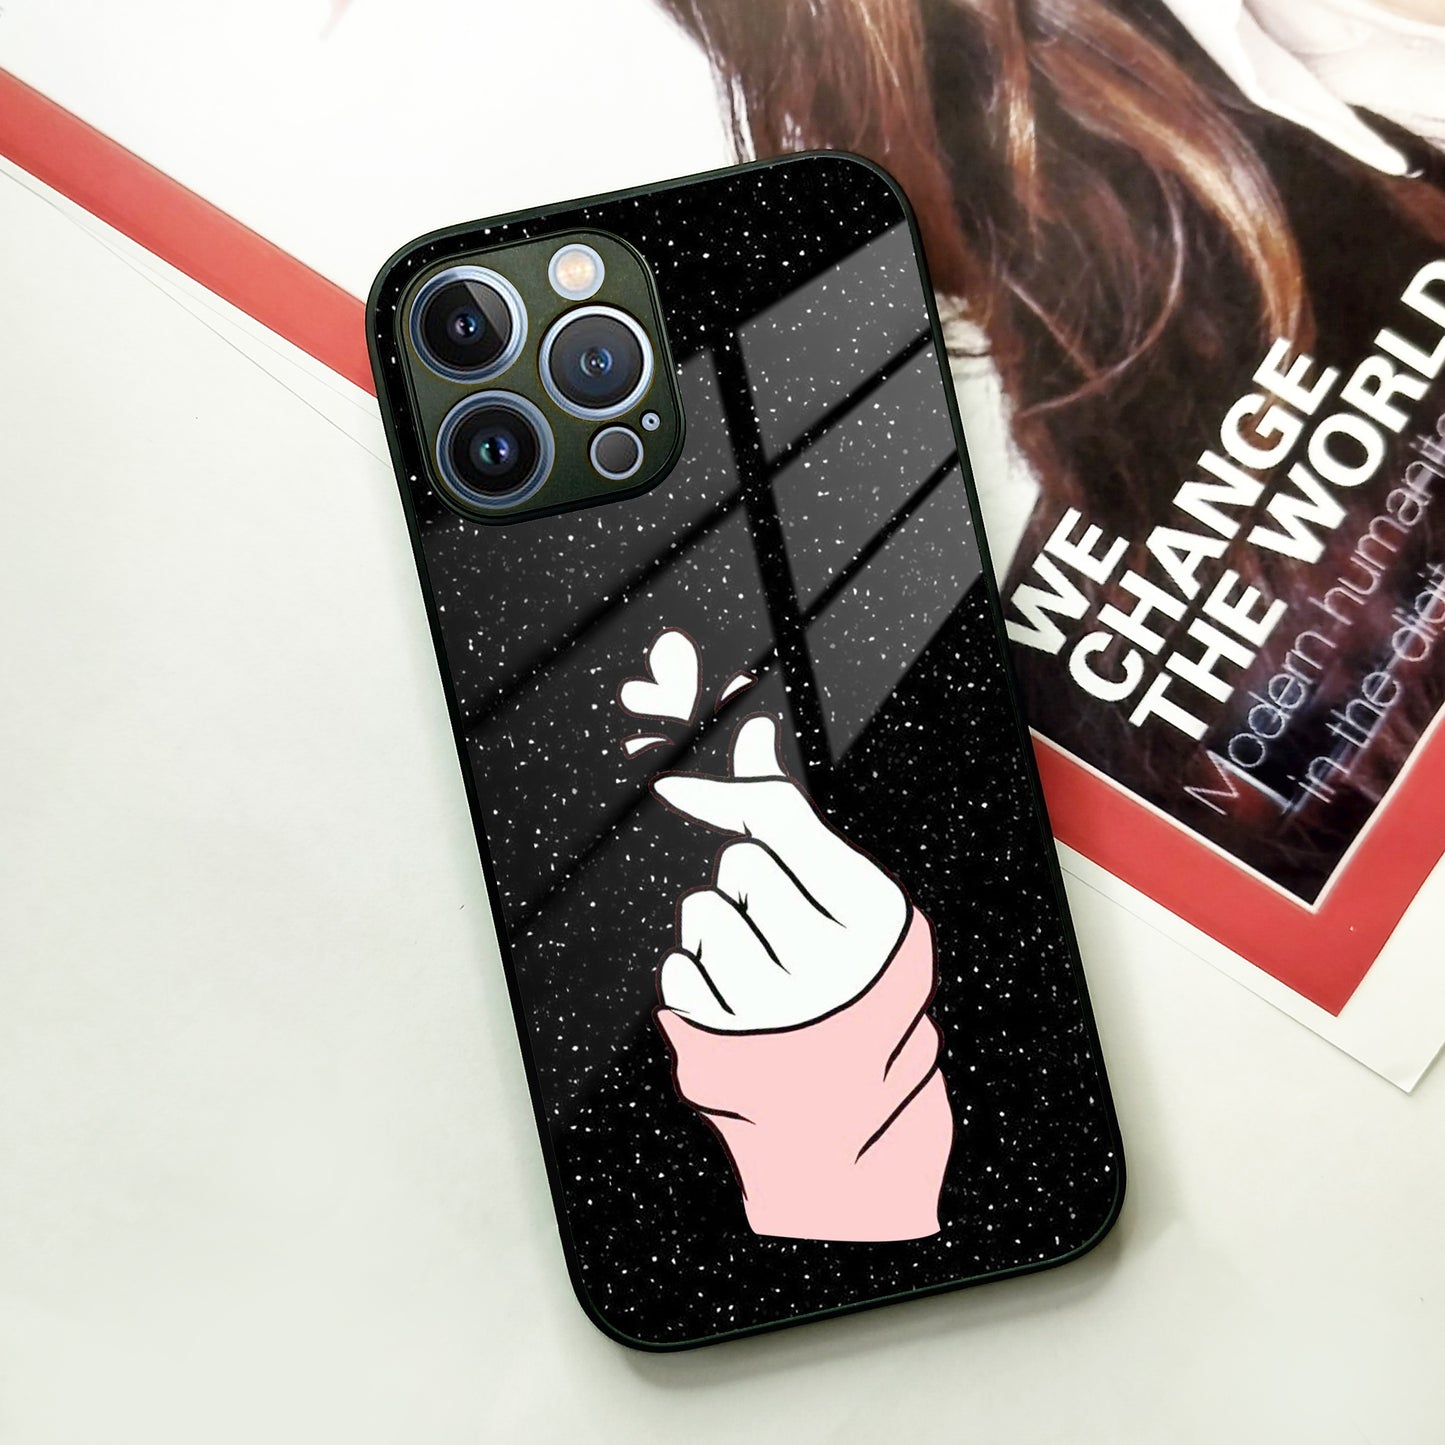 Kpop Love Glass Phone Case And Cover For iPhone